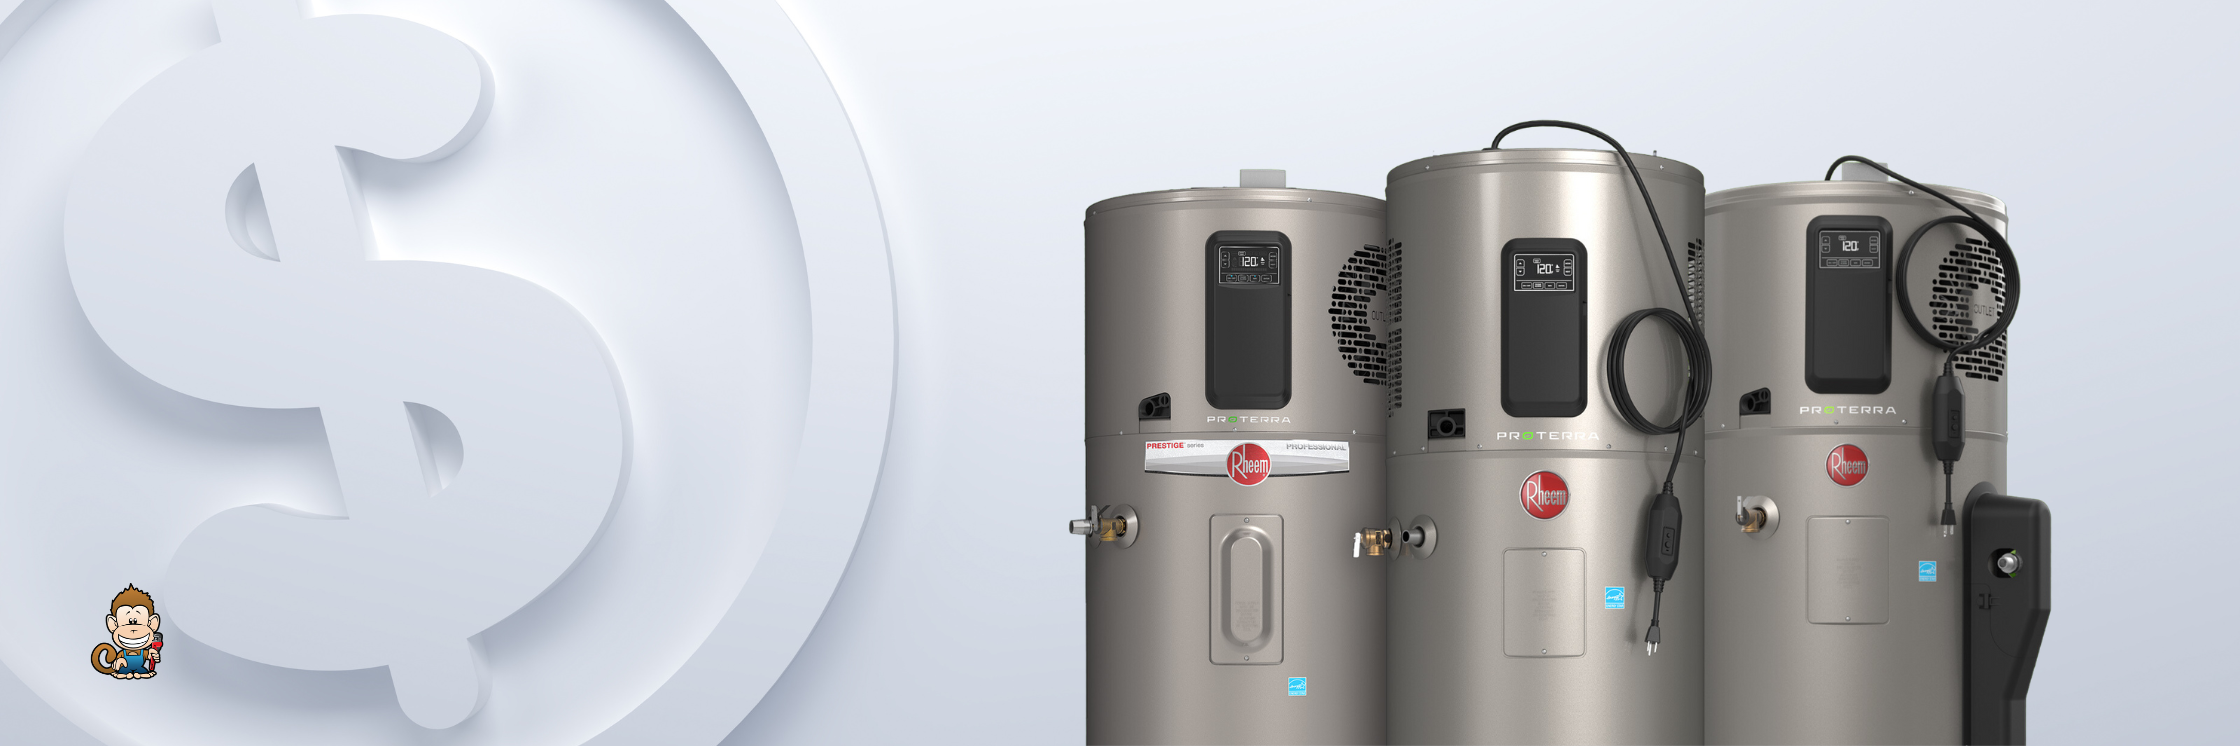 How Much Do Heat Pump Water Heaters Cost?